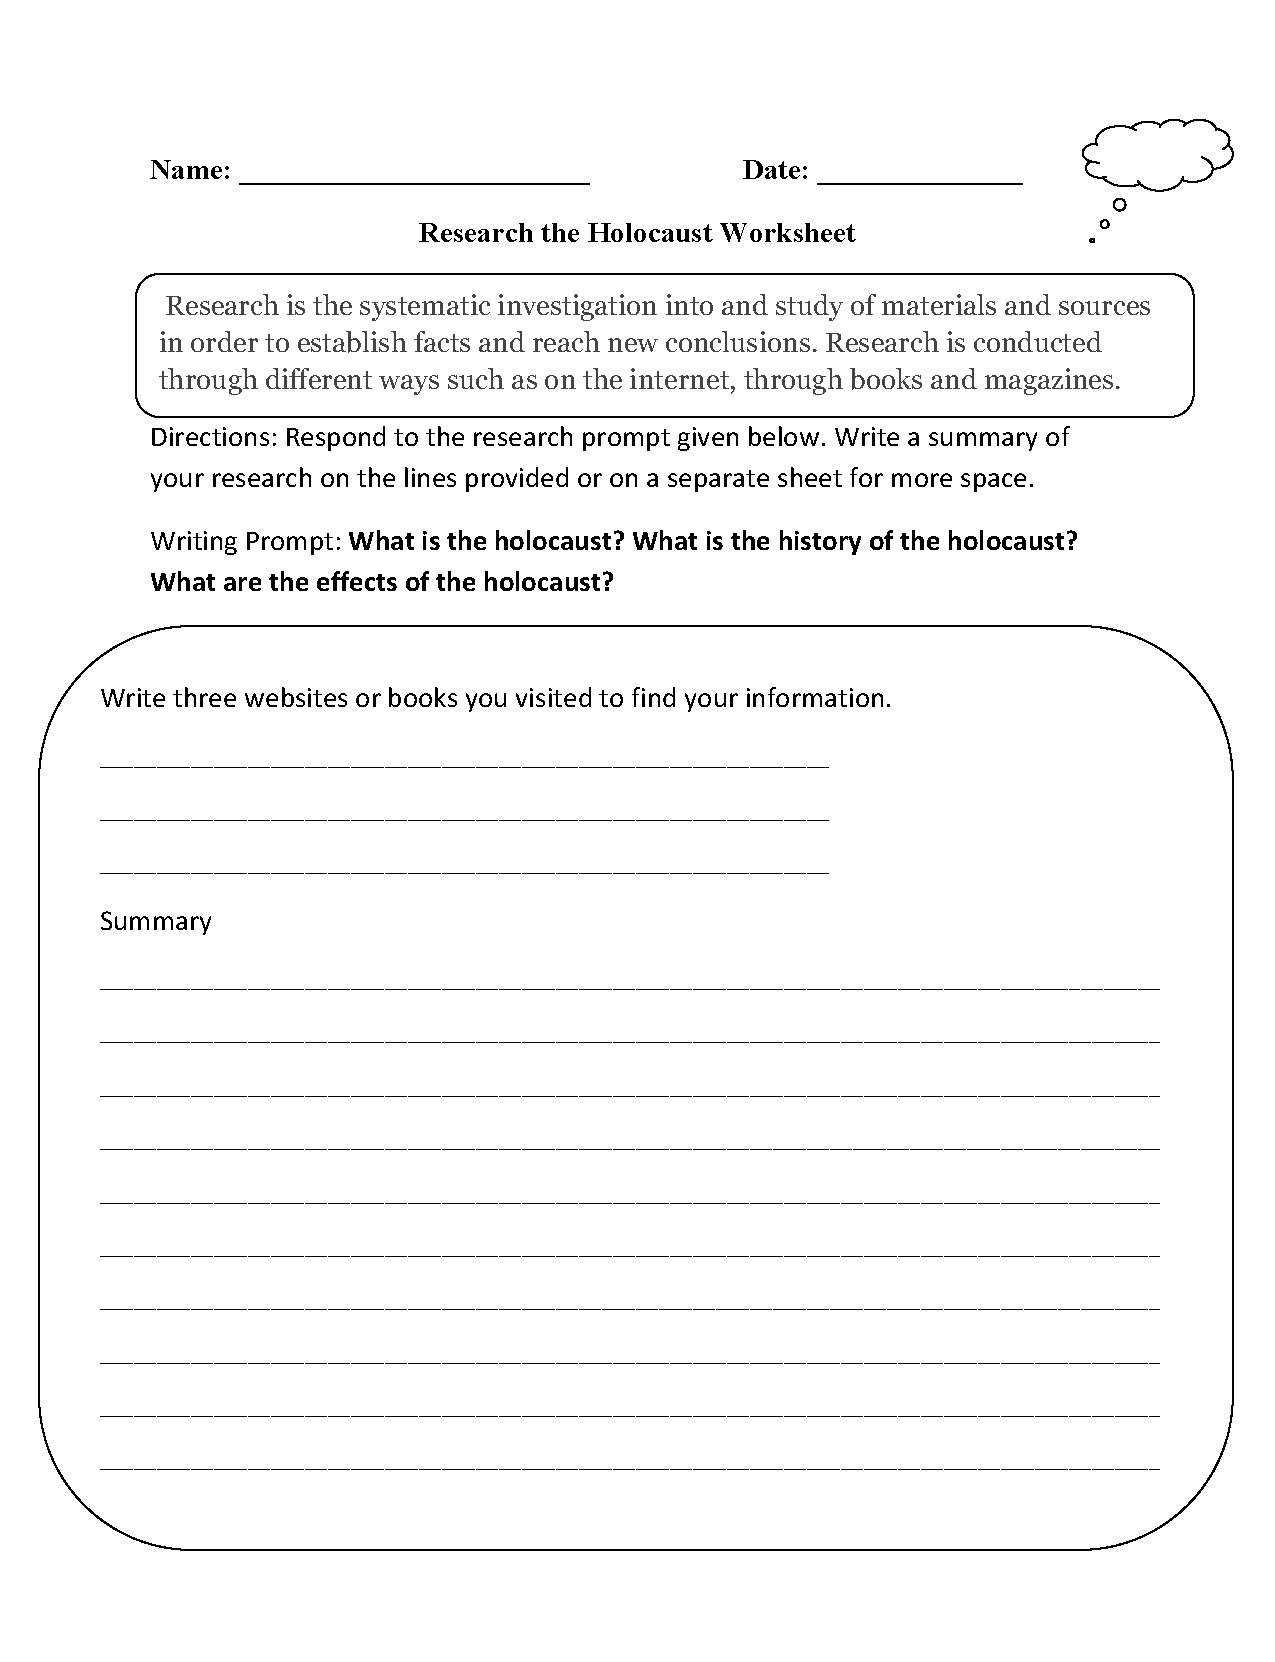 Research Holocaust Worksheet